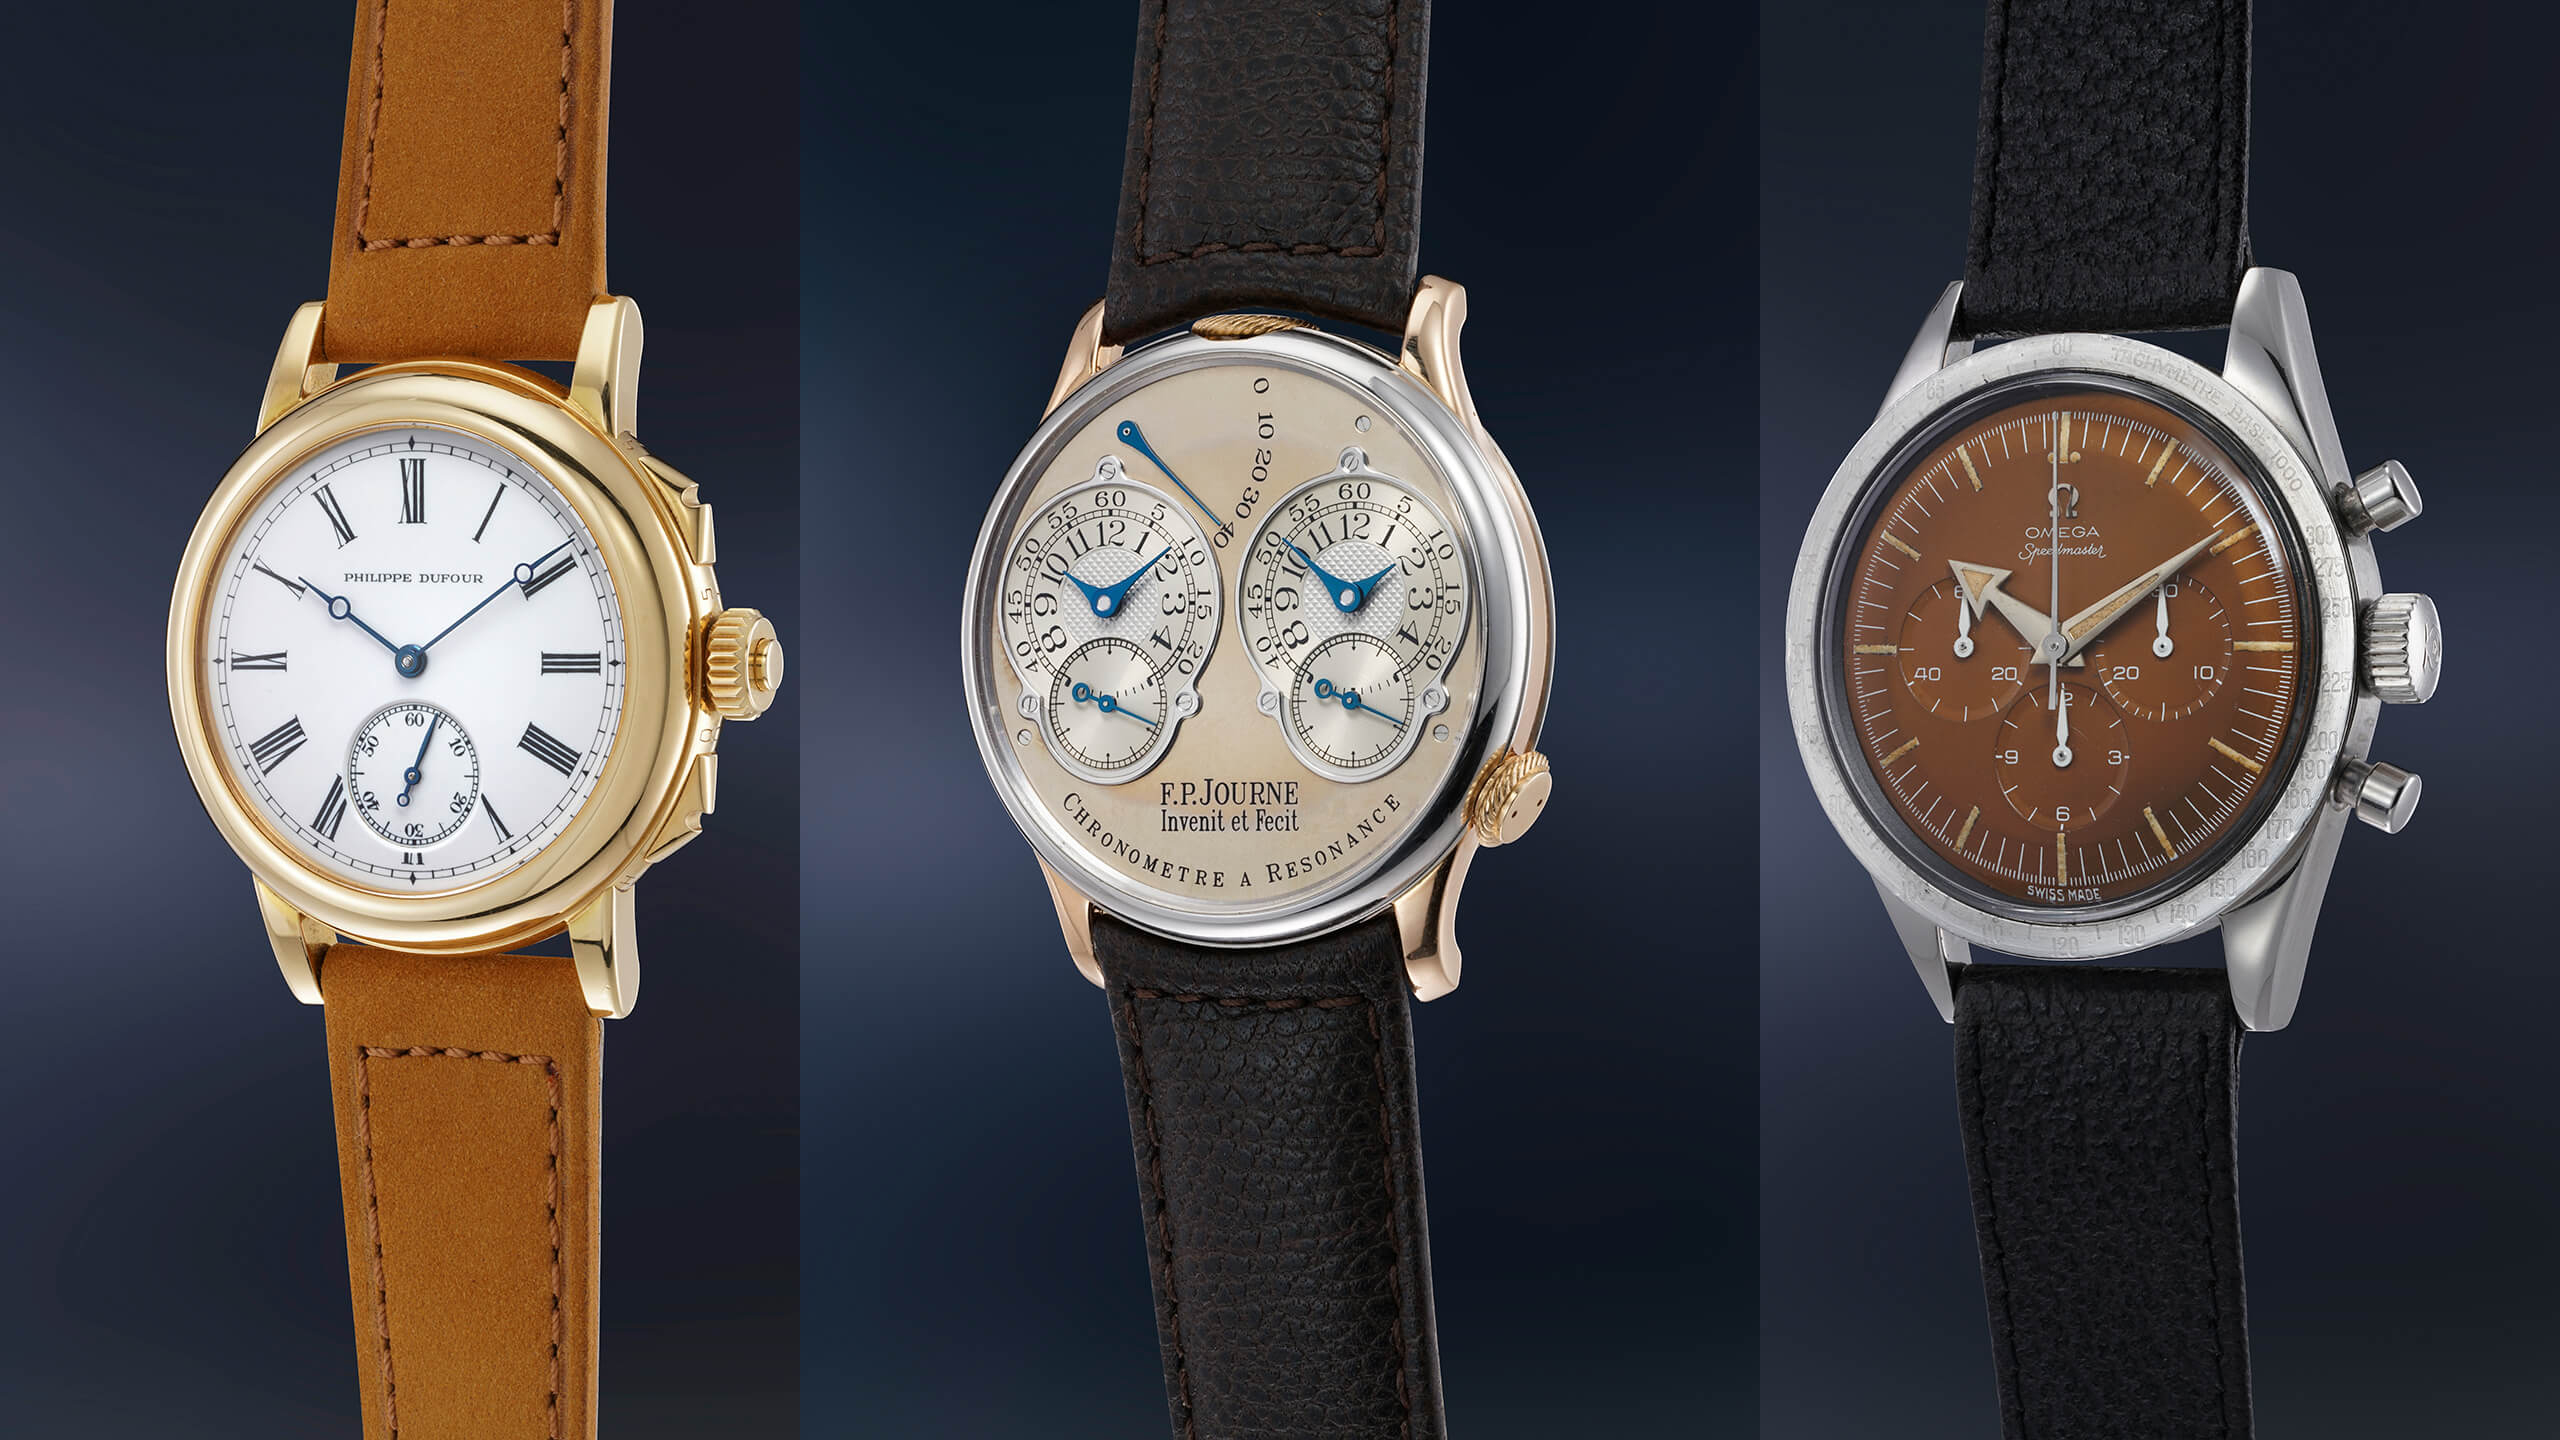 Spending time: The November 2021 watch auctions